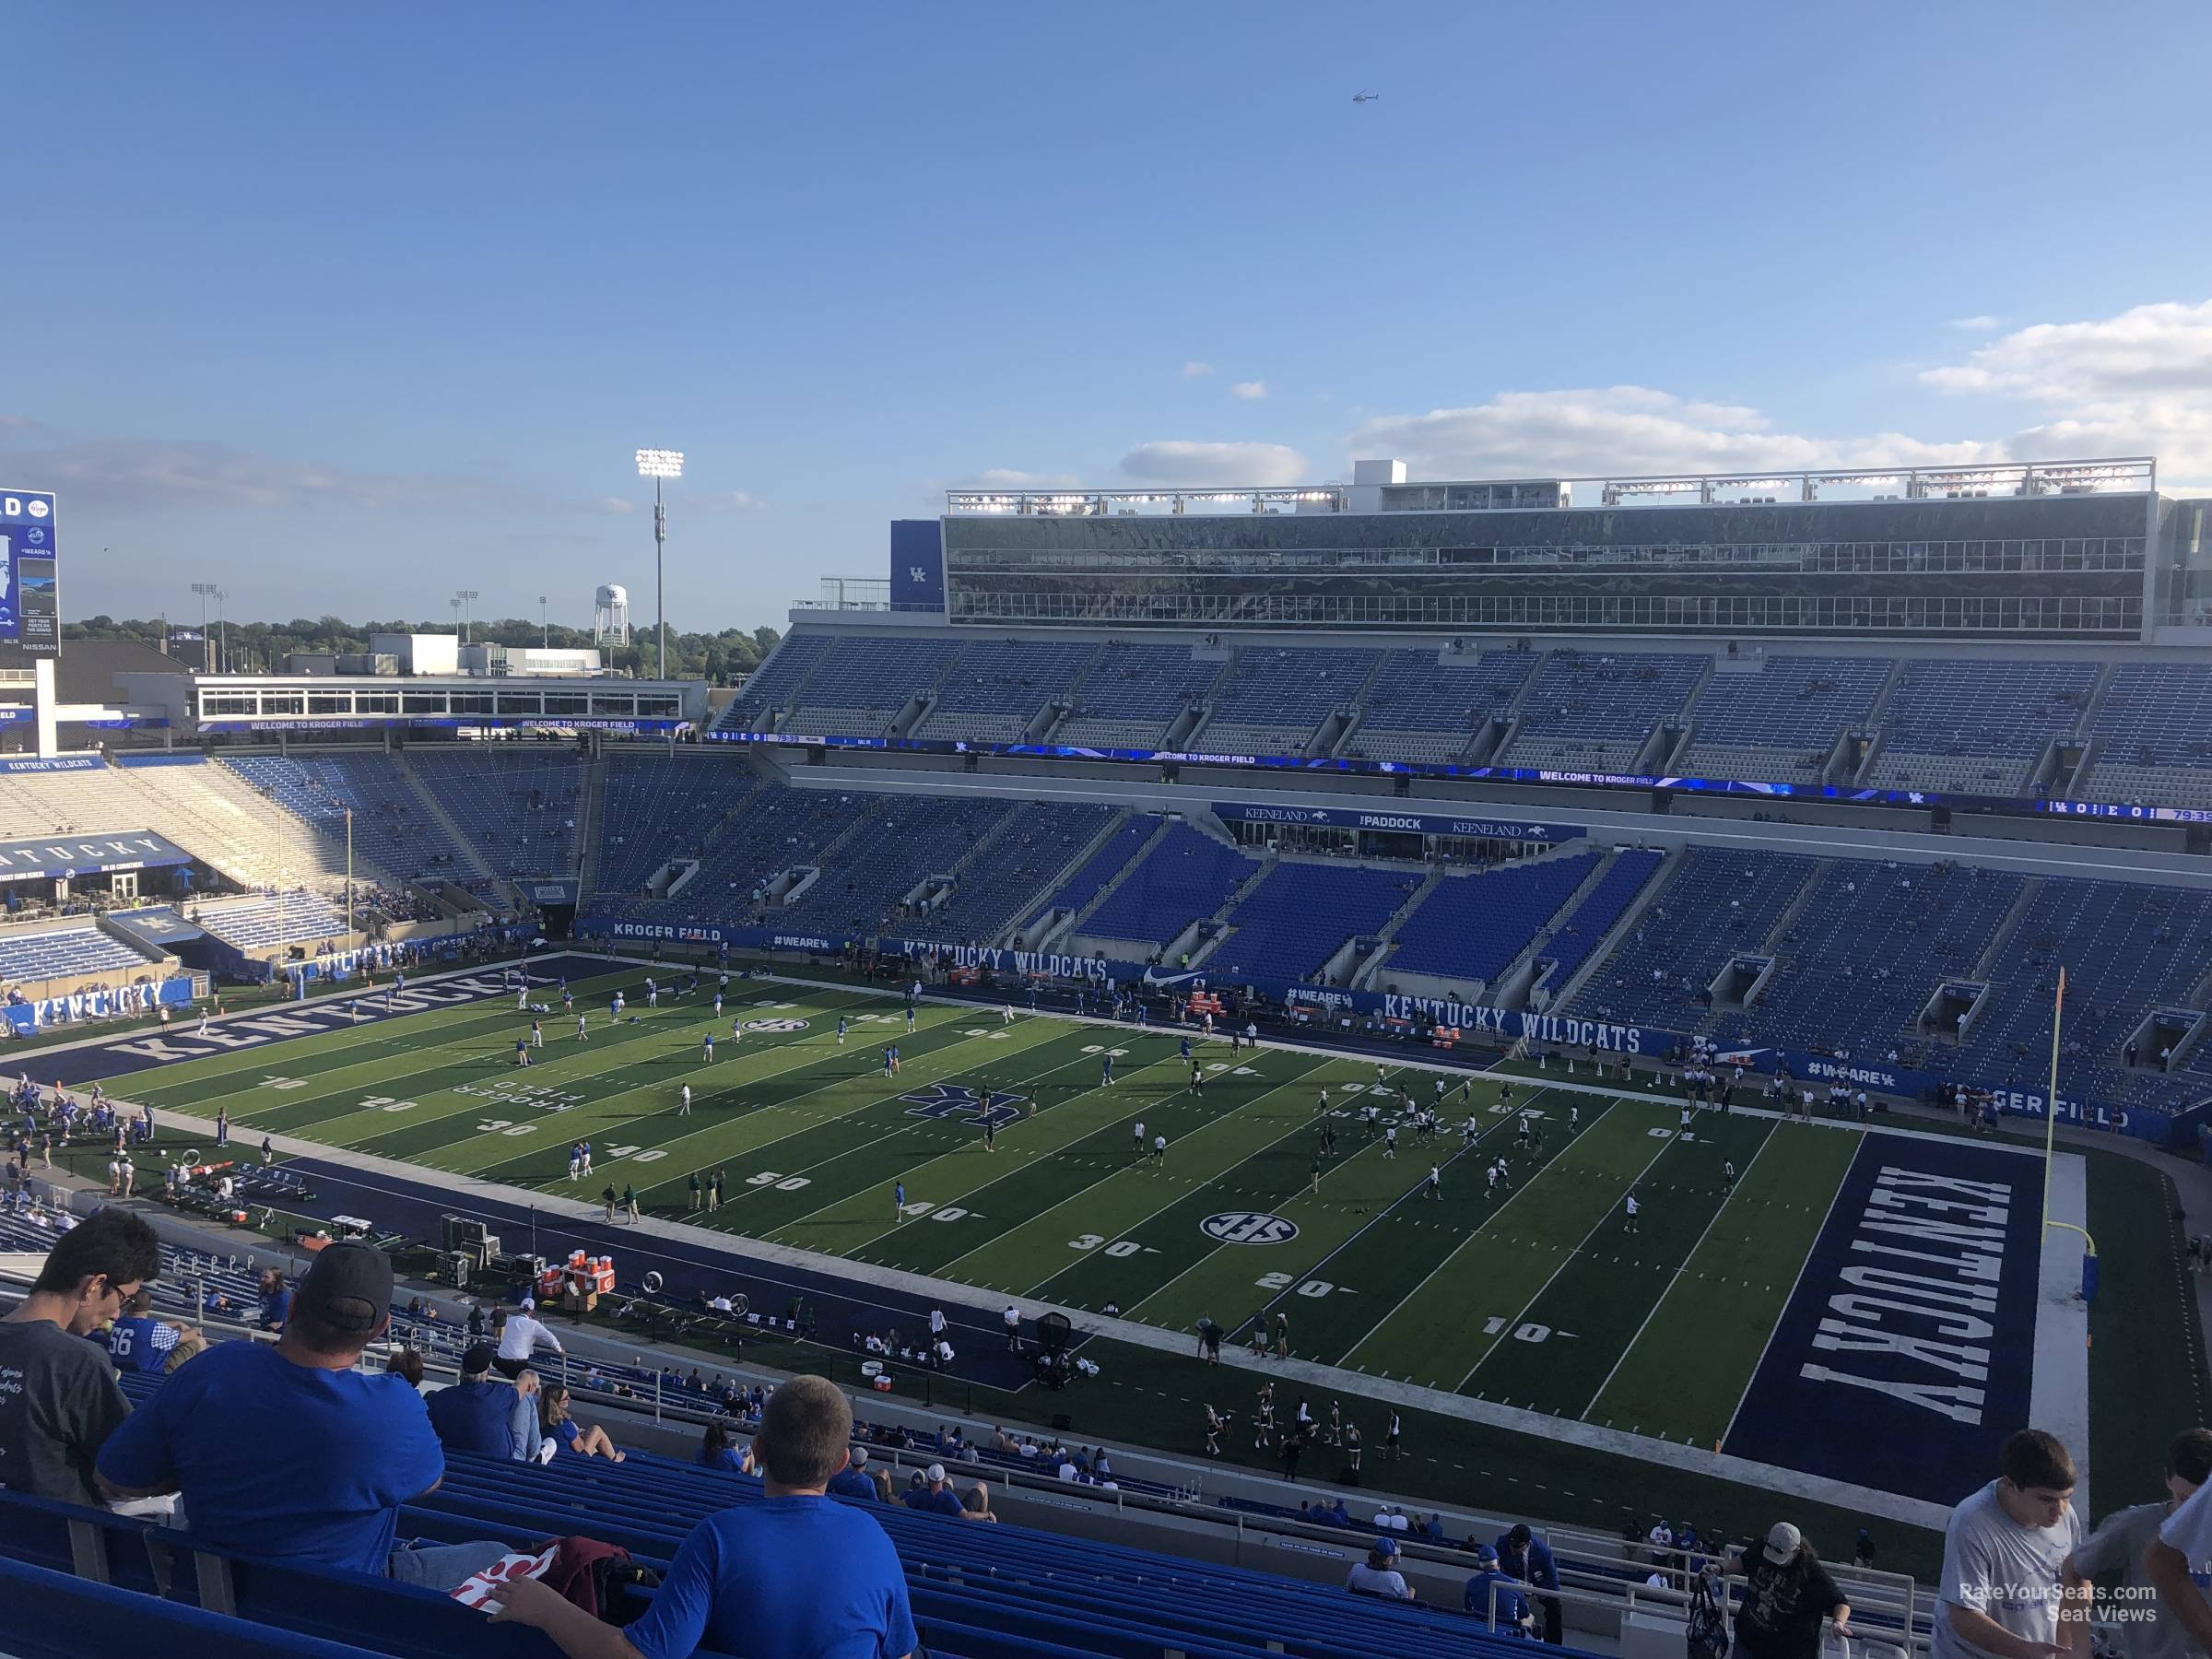 Section 210 at Kroger Field